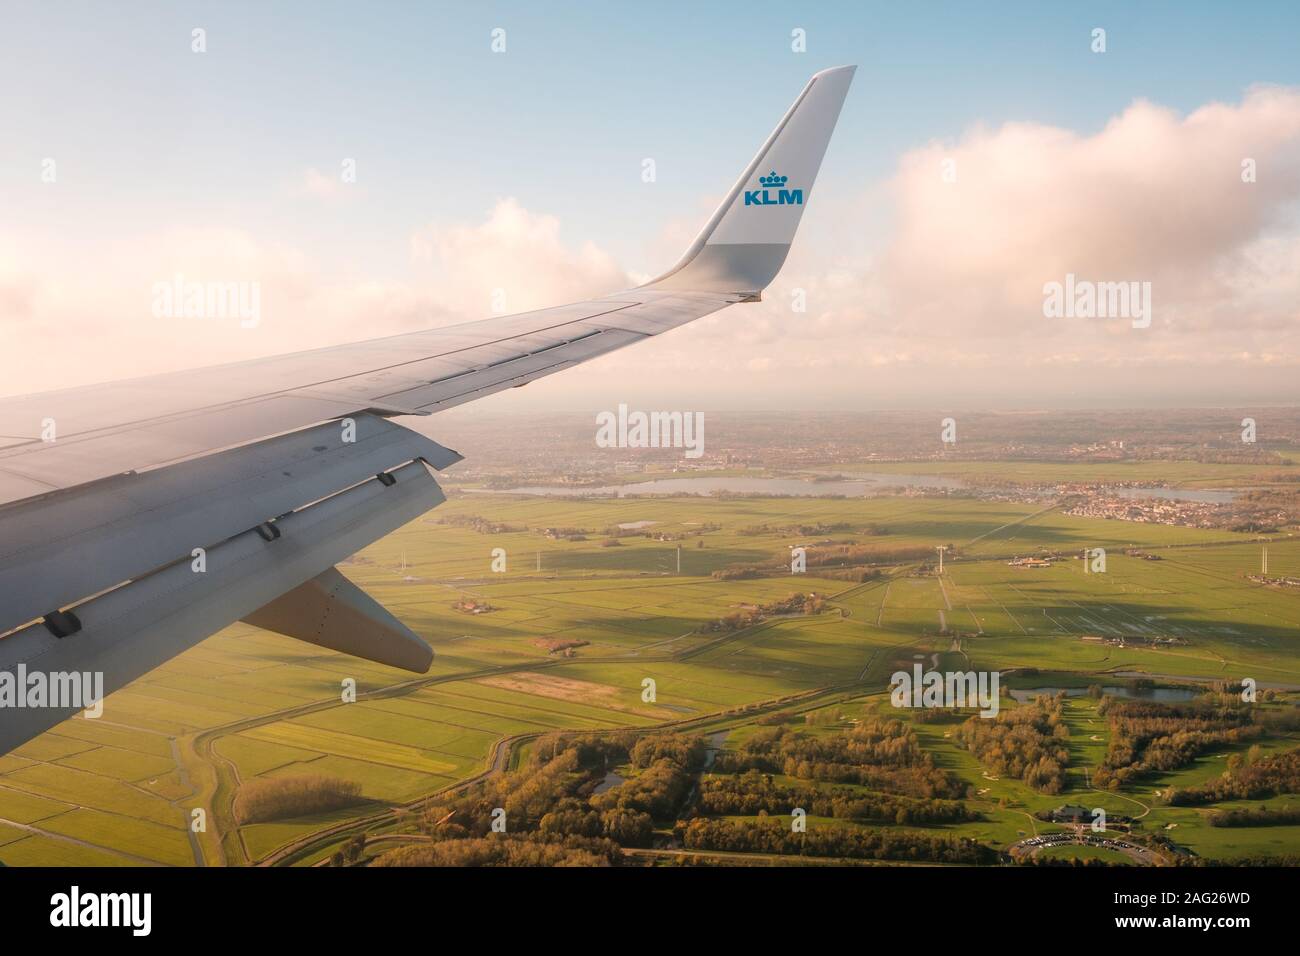 Amsterdam, Netherlands - November, 2019: Airplane wing and company brand logo of KLM Airlines and aerial landscape view from airplane Stock Photo